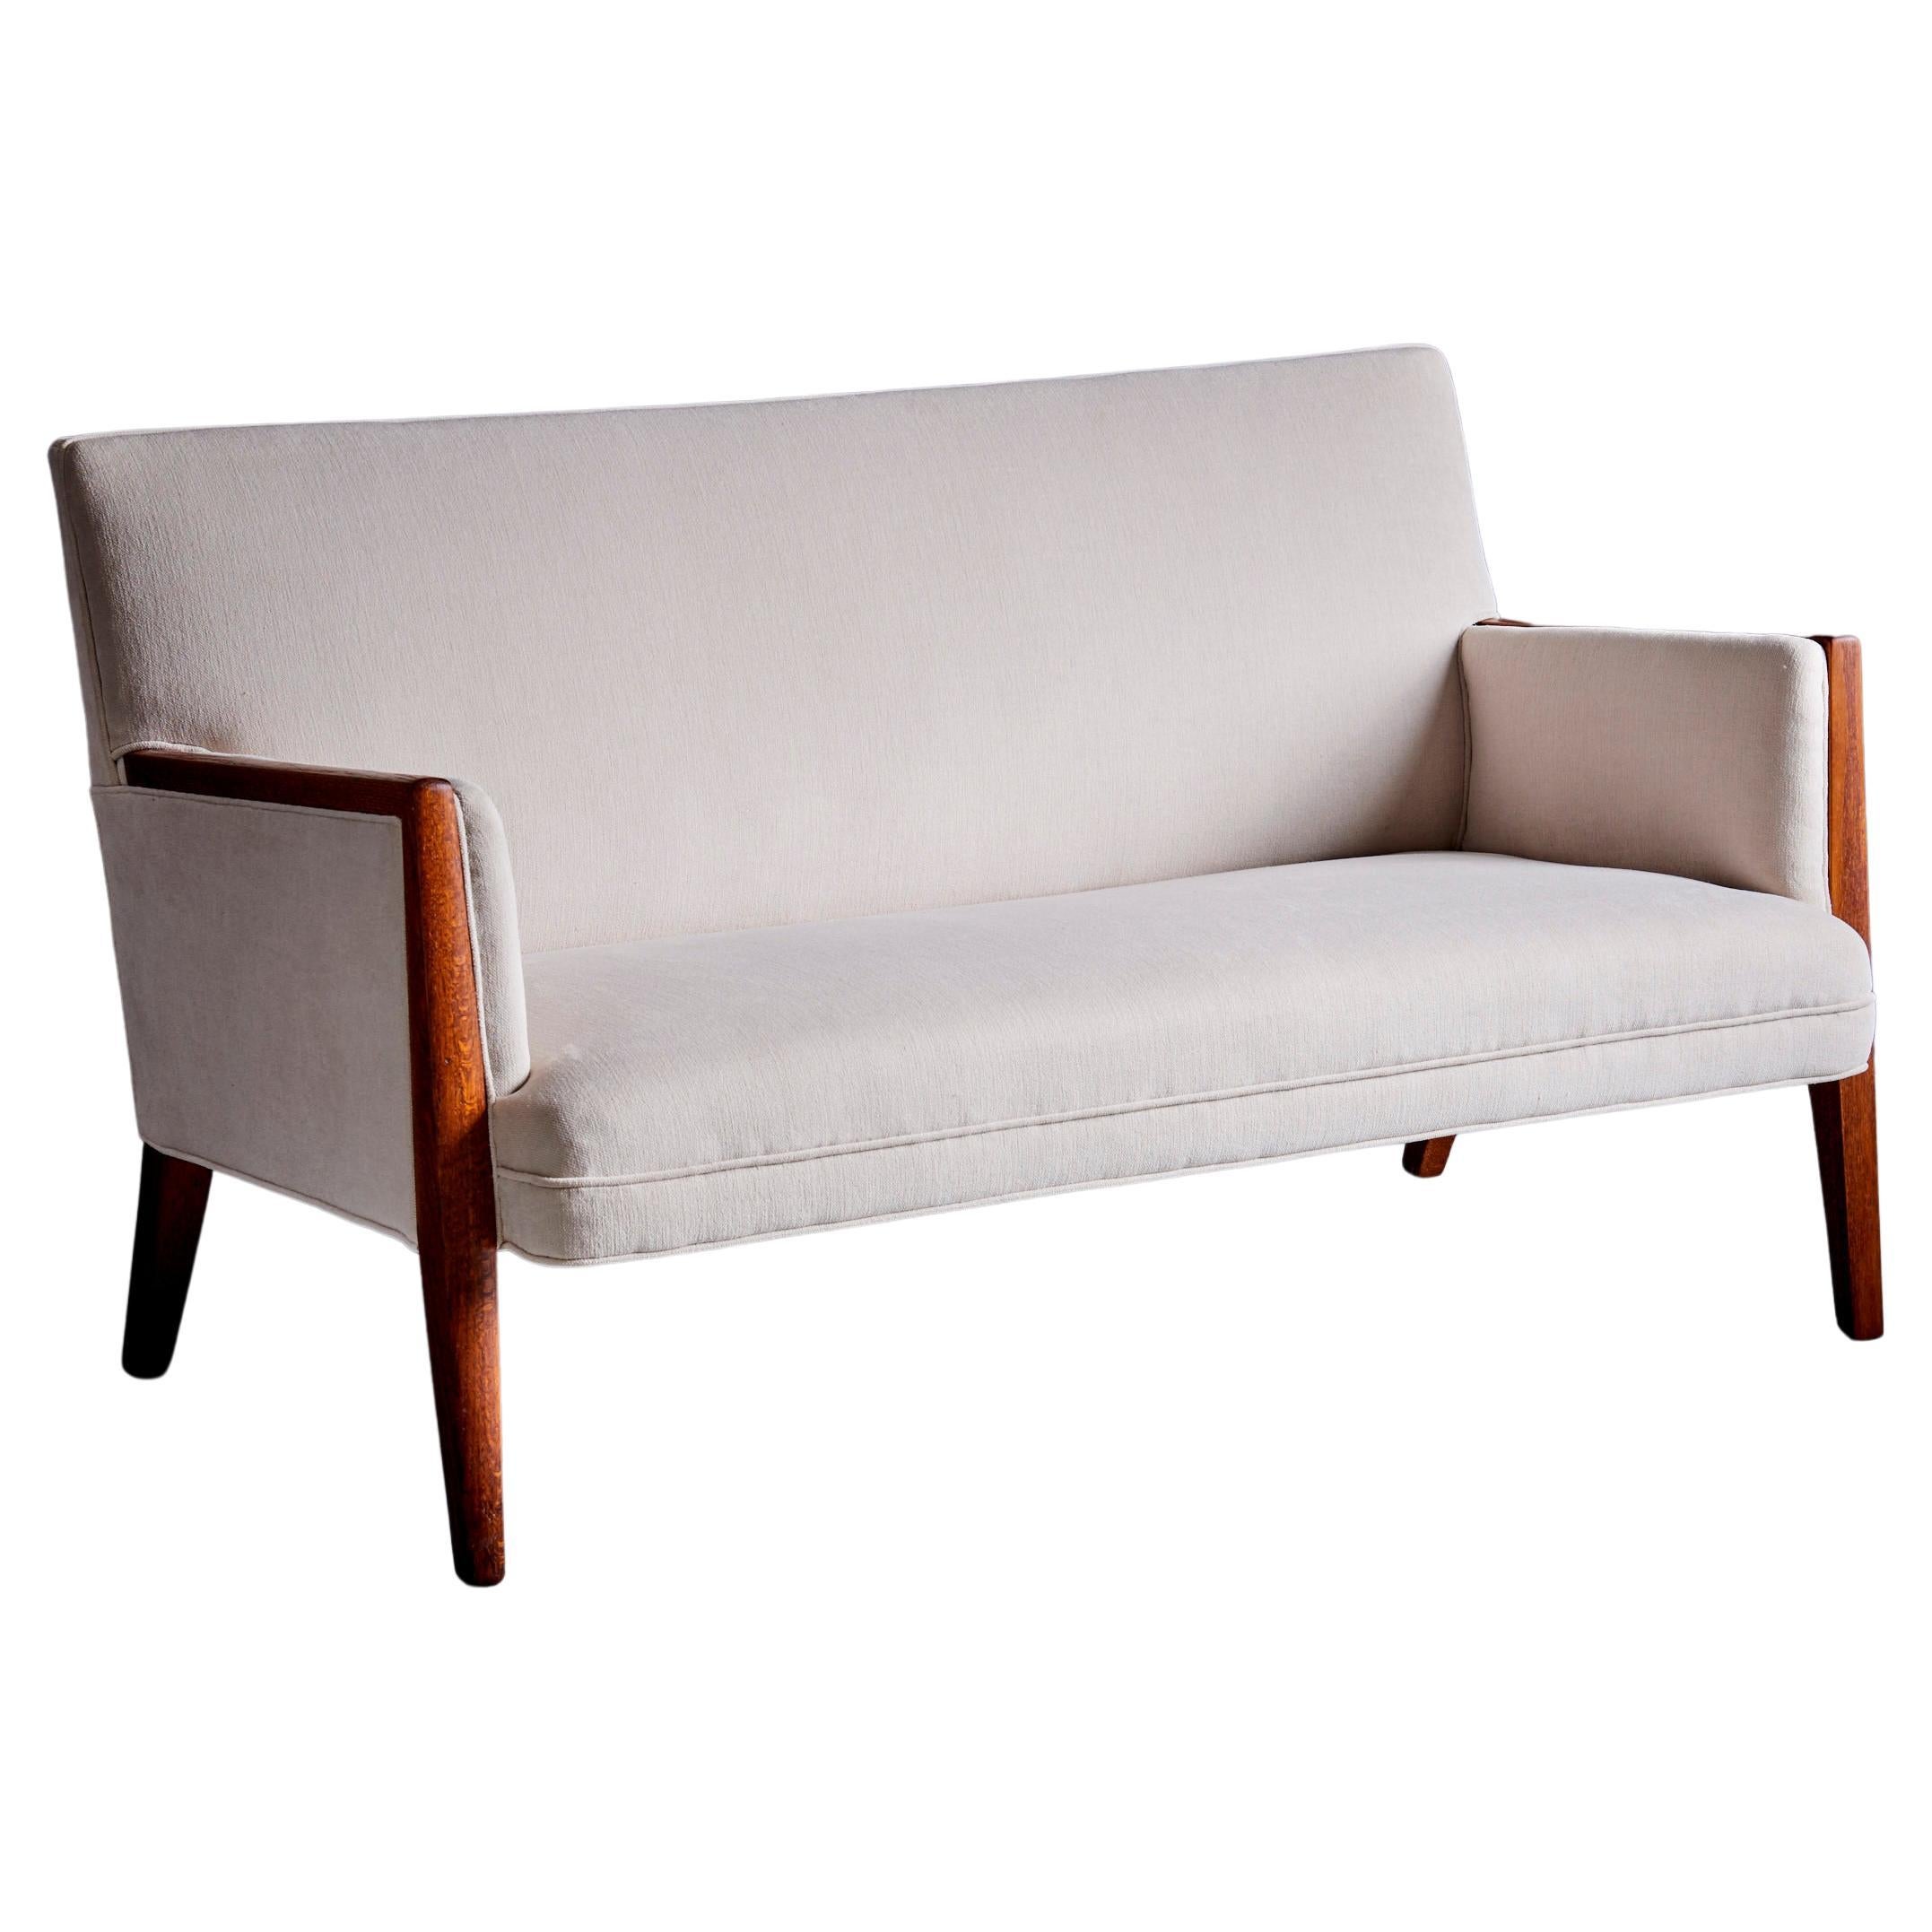 Newly upholstered Kvadrat Jens Risom settee or two seater USA - 1950s For Sale